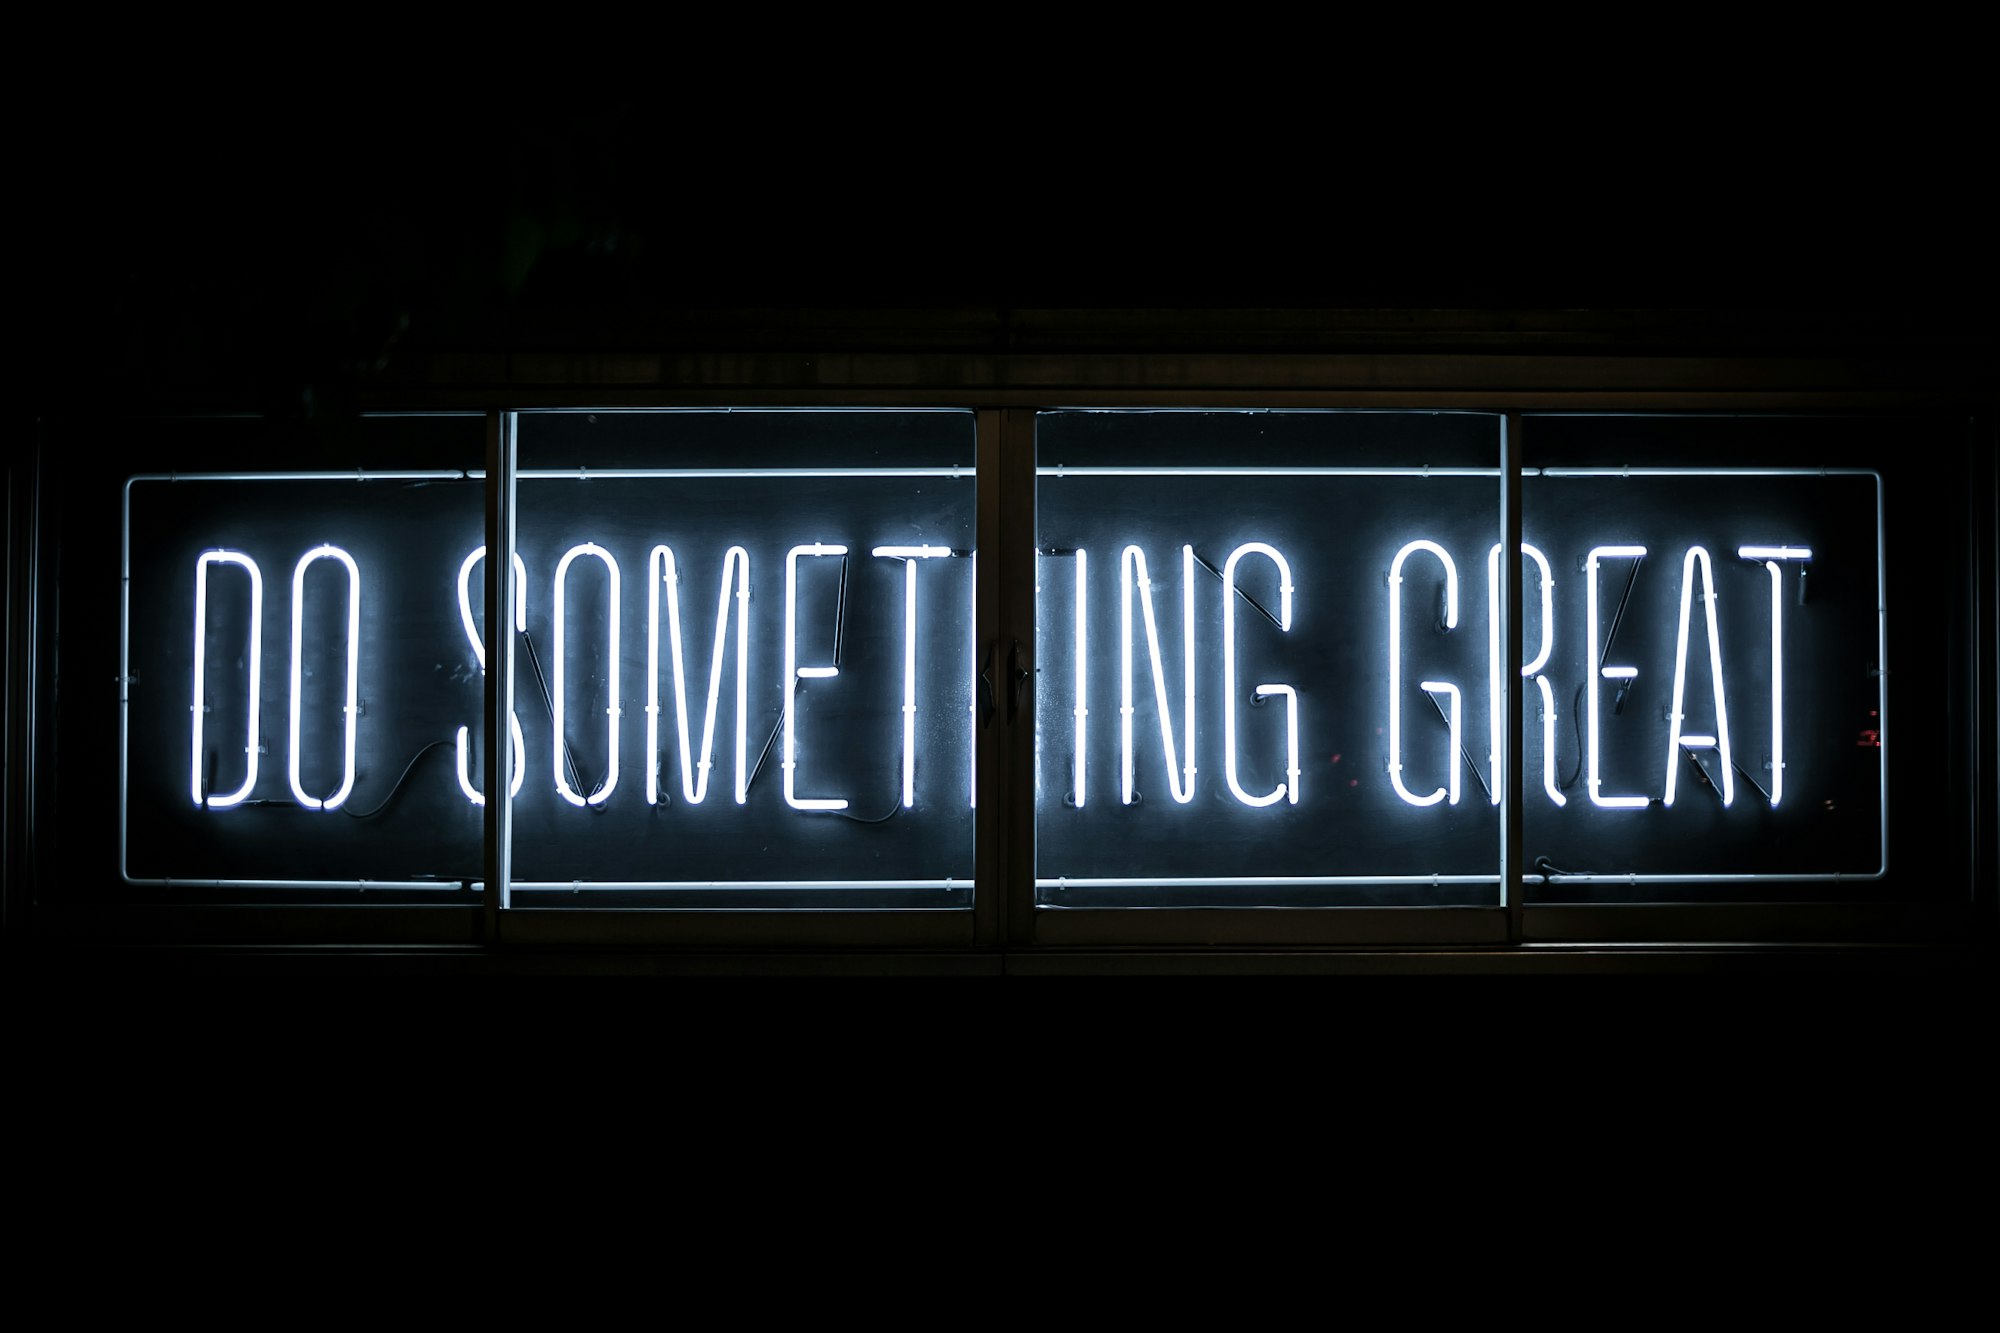 "Do Something Great" neon sign